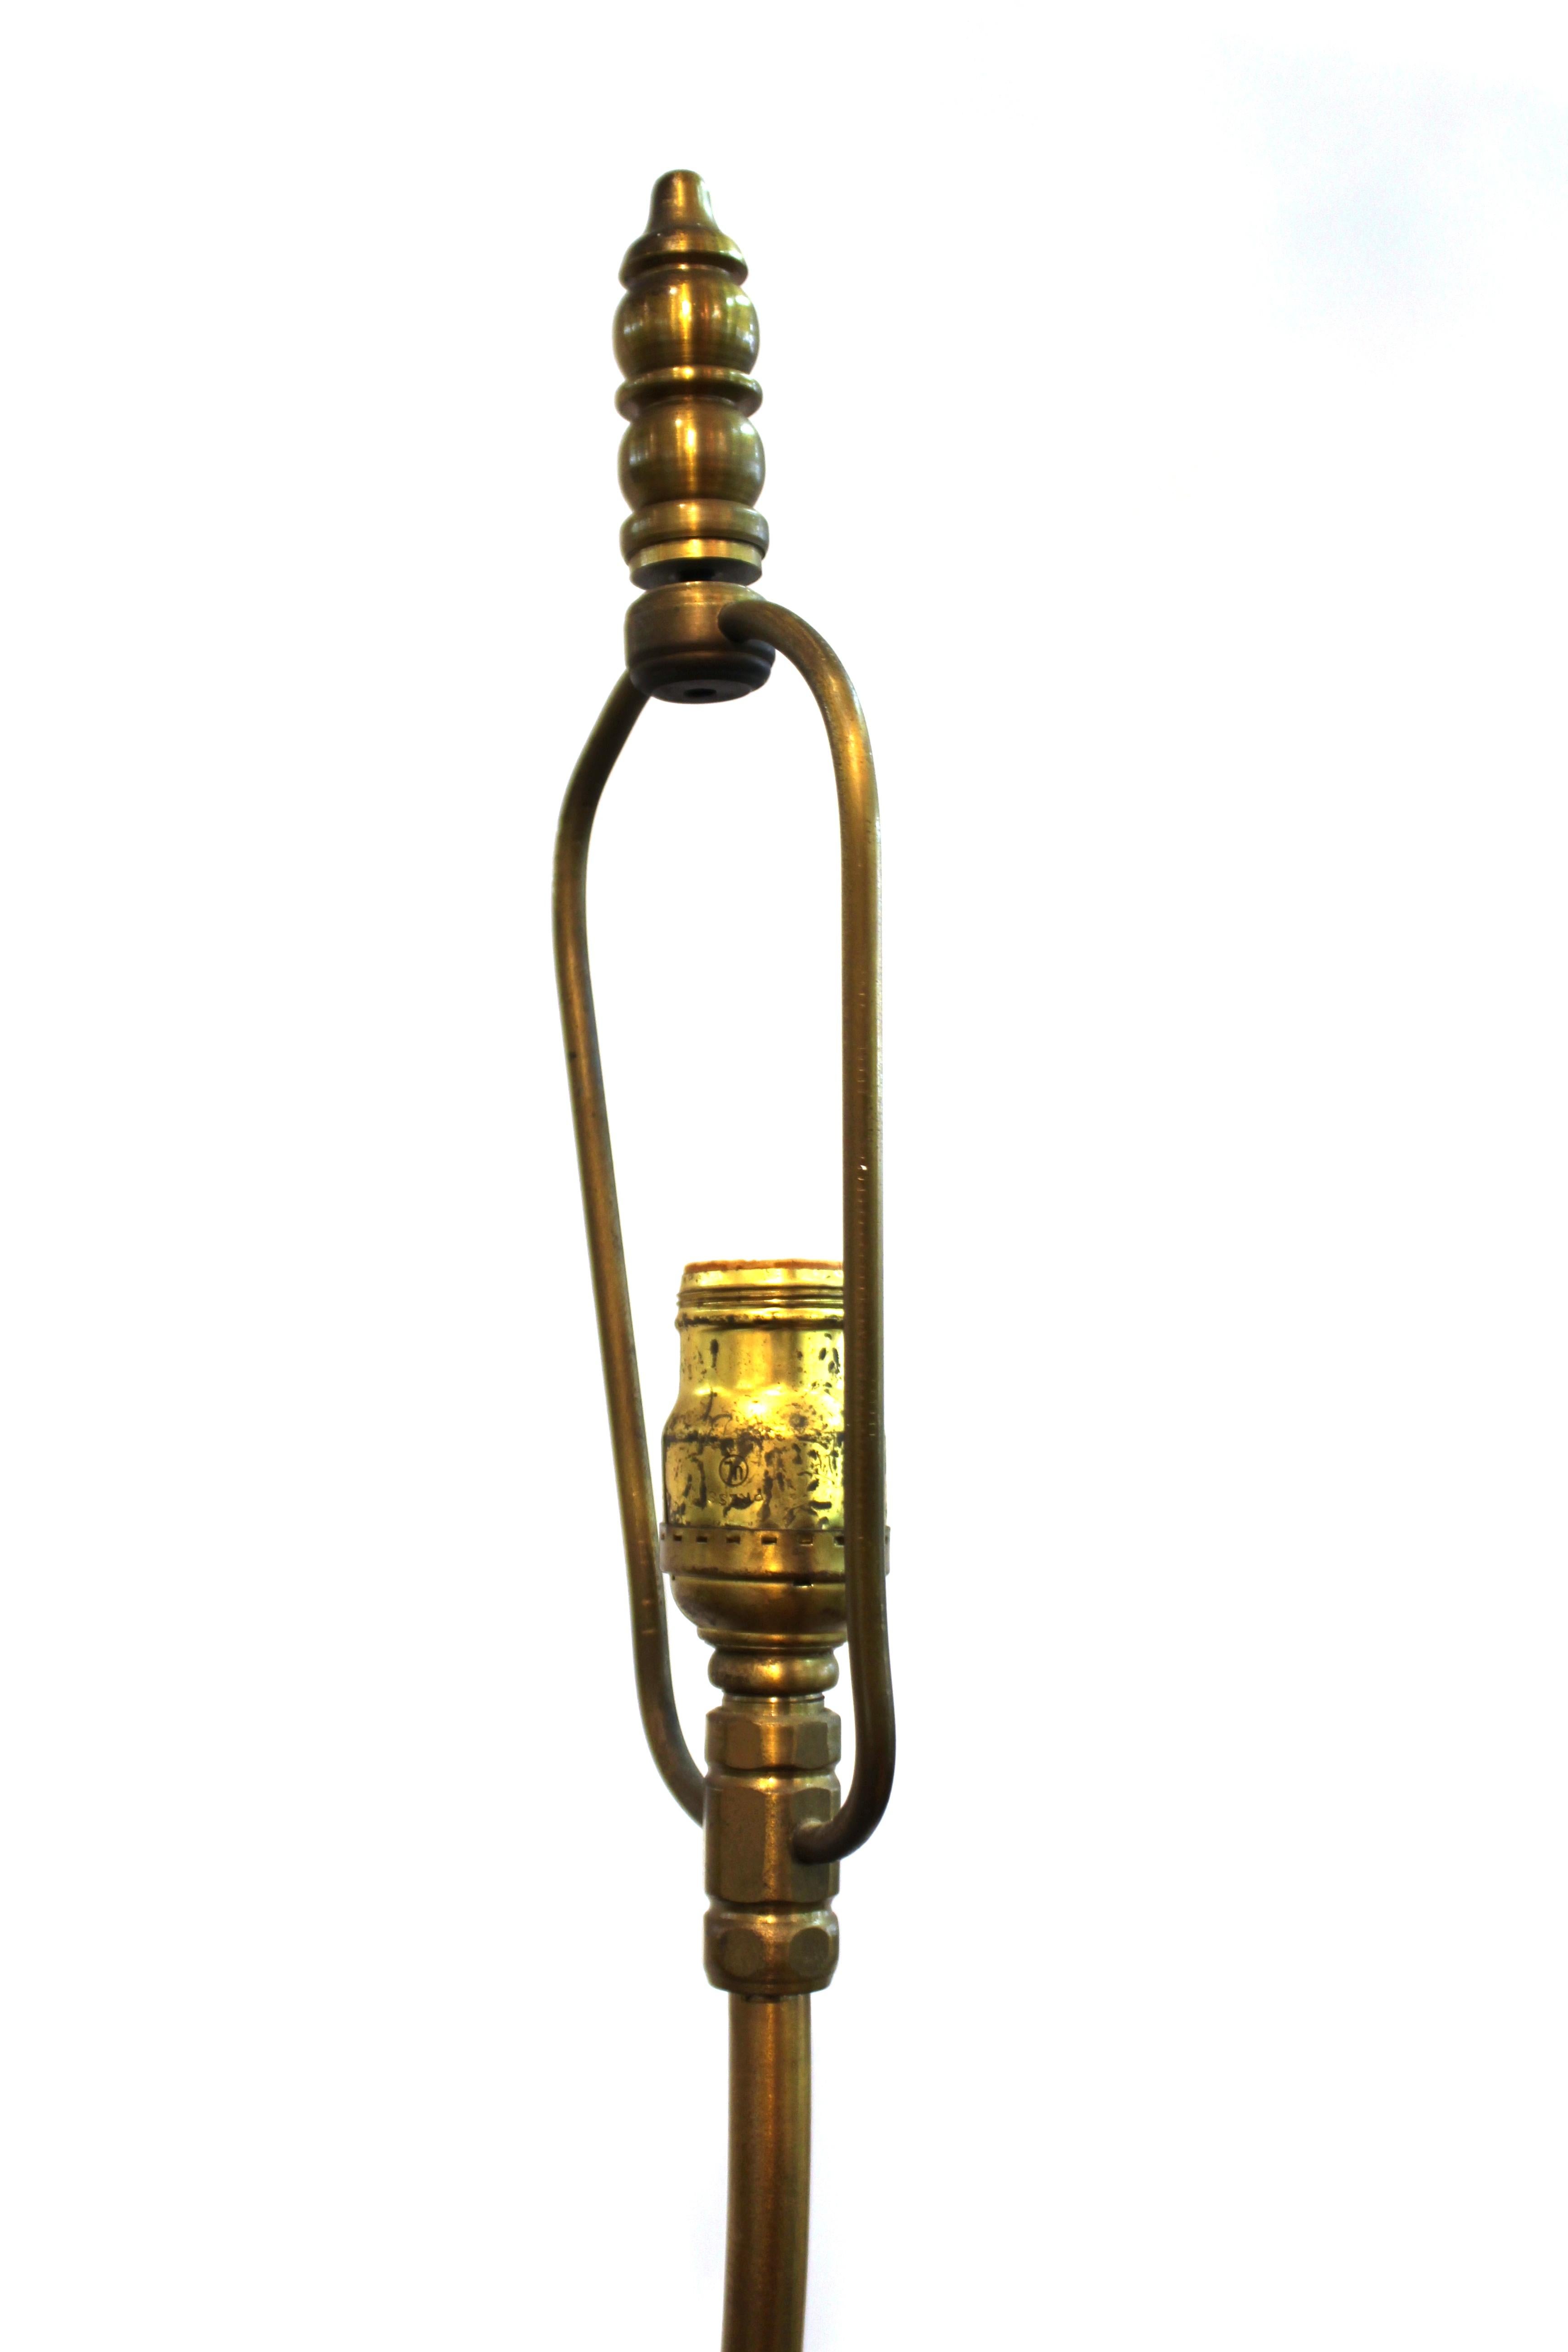 French Belle Époque neoclassical Revival style table lamp made with a bronze cast statue of Athena in seated position atop a marble base, holding a staff with an integrated light. The piece has part of a makers mark on the base, pierced by the staff